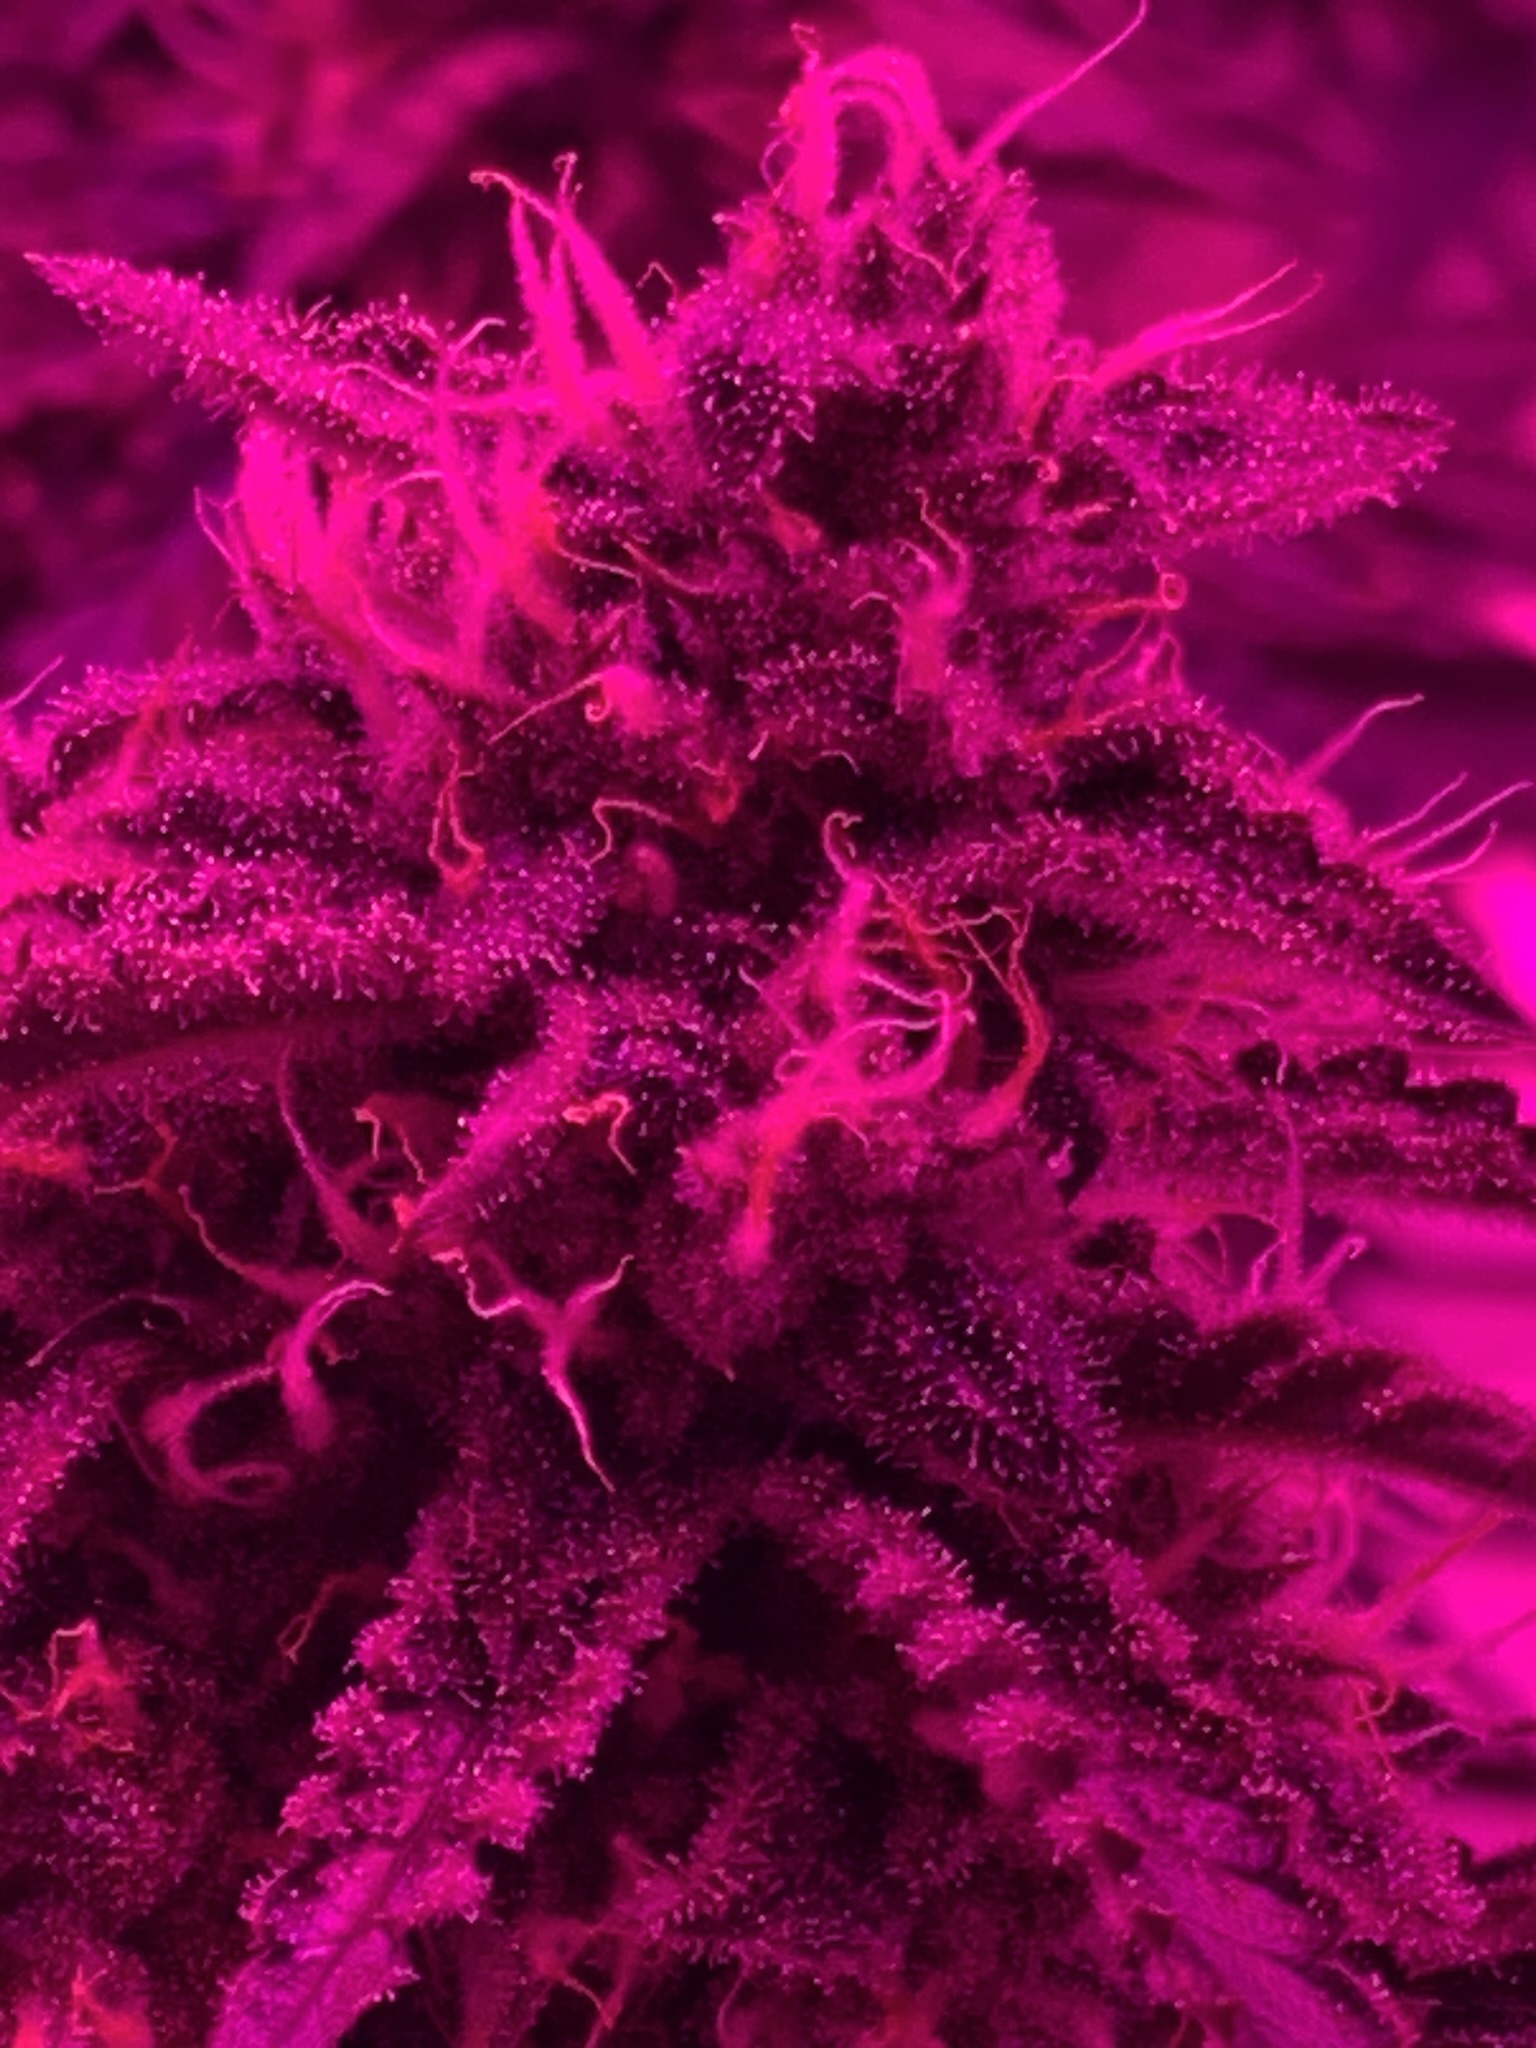 Pineapple Express ….90 days old  chop soon!